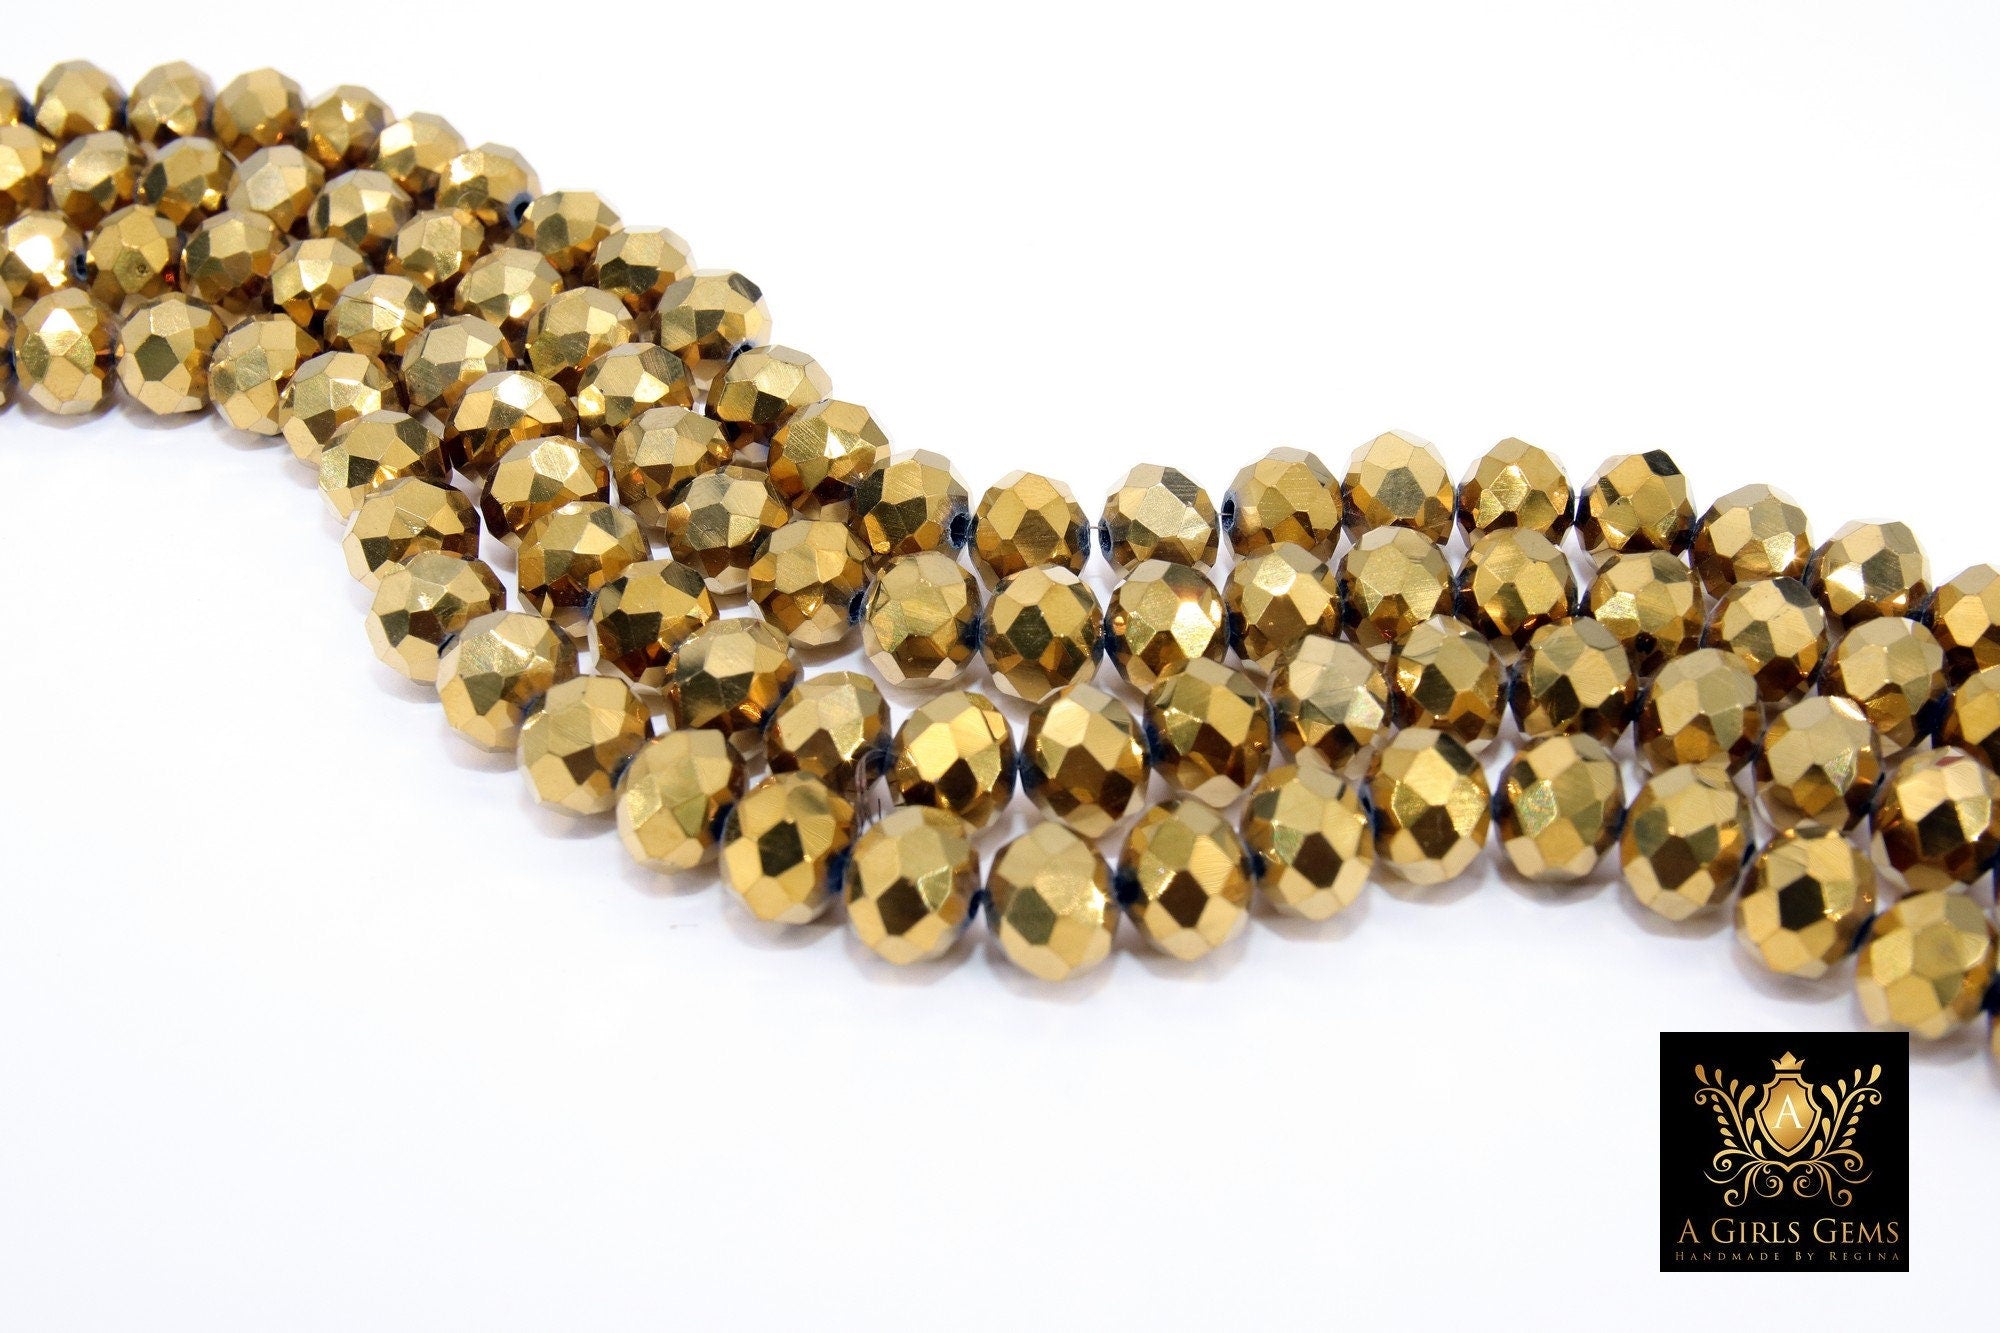 Gold LSU Tiger Beads, Electroplated Gold Crystal Beads BS #223, Rondelle size 7 x 10 mm, 18 Inch Strands